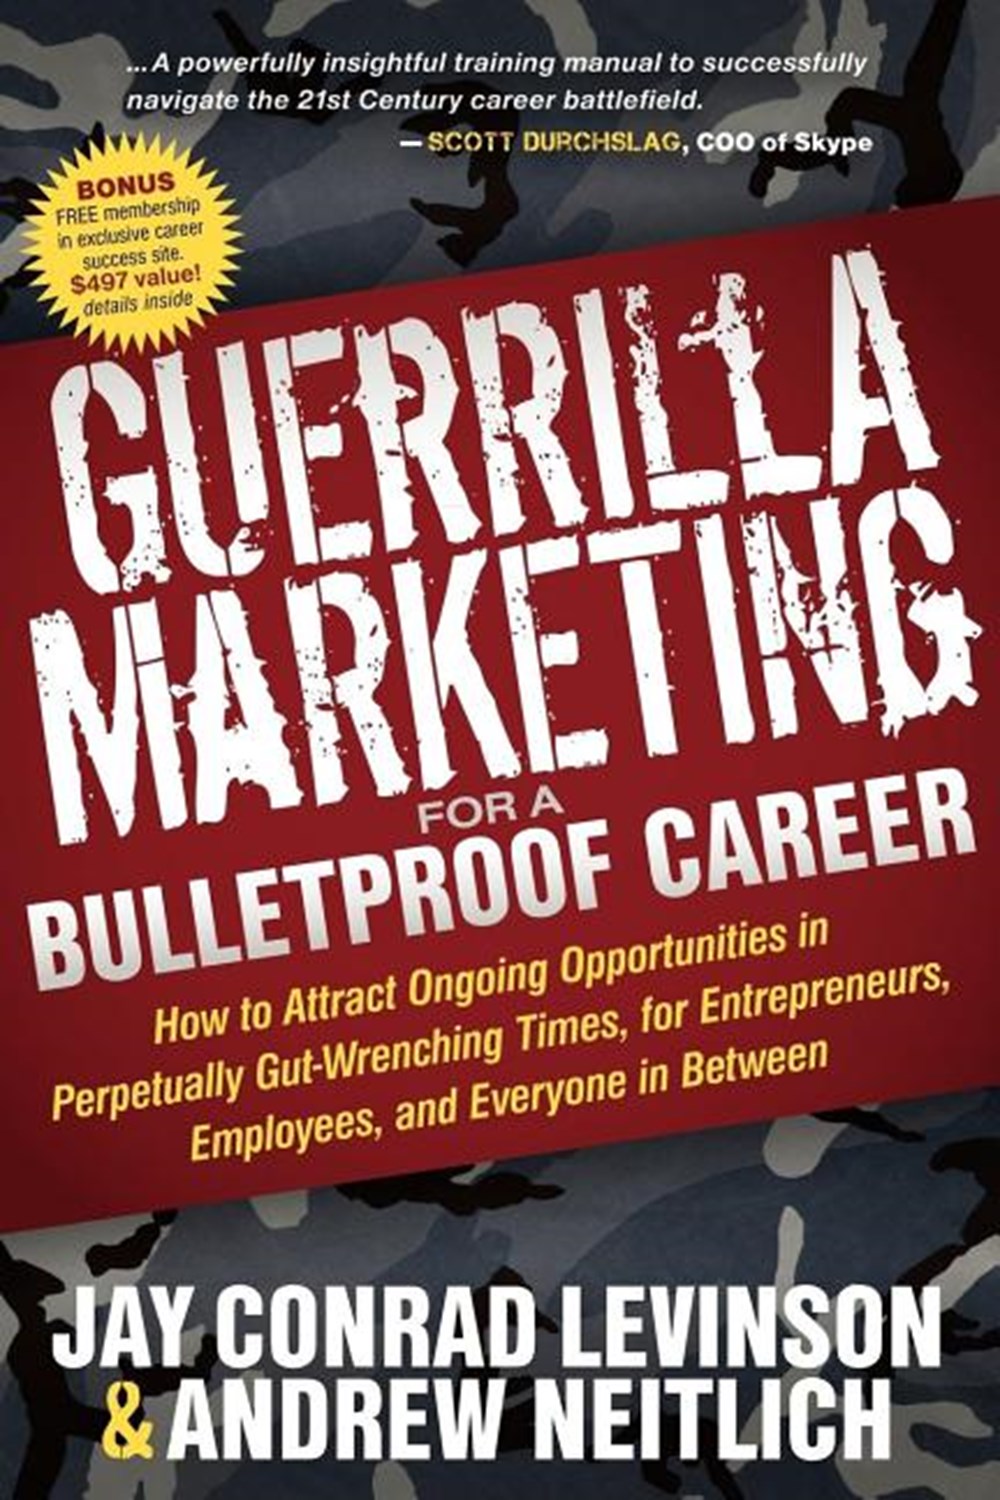 Guerrilla Marketing for a Bulletproof Career: How to Attract Ongoing Opportunities in Perpetually Gu